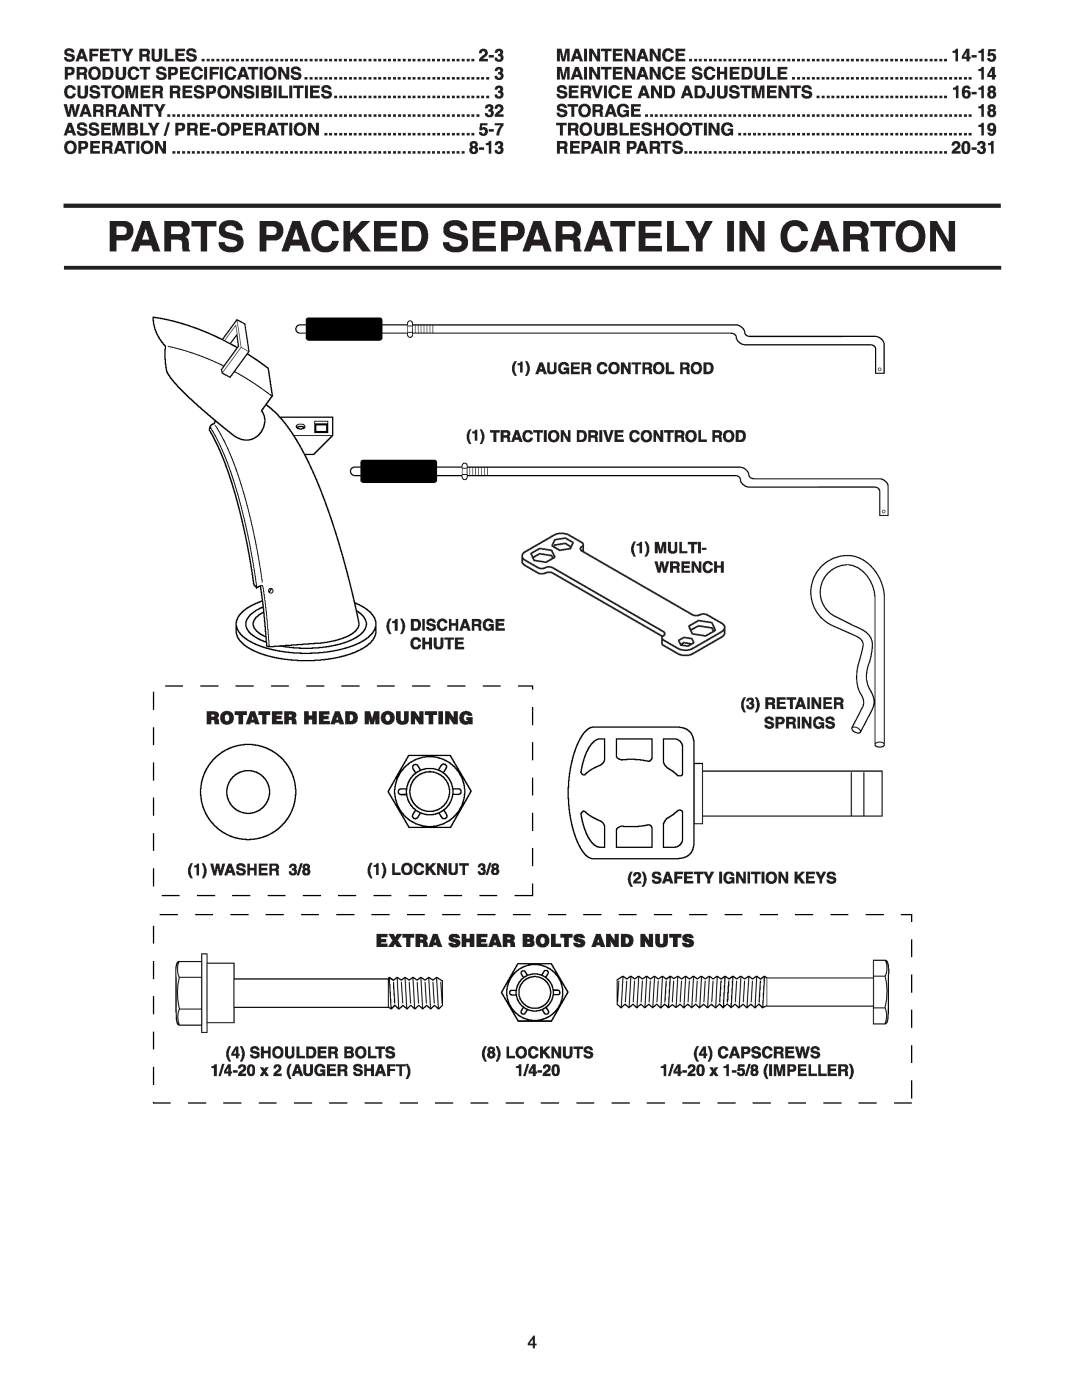 Poulan 187877 owner manual Parts Packed Separately In Carton, 8-13, 14-15, Service And Adjustments, 16-18, 20-31 